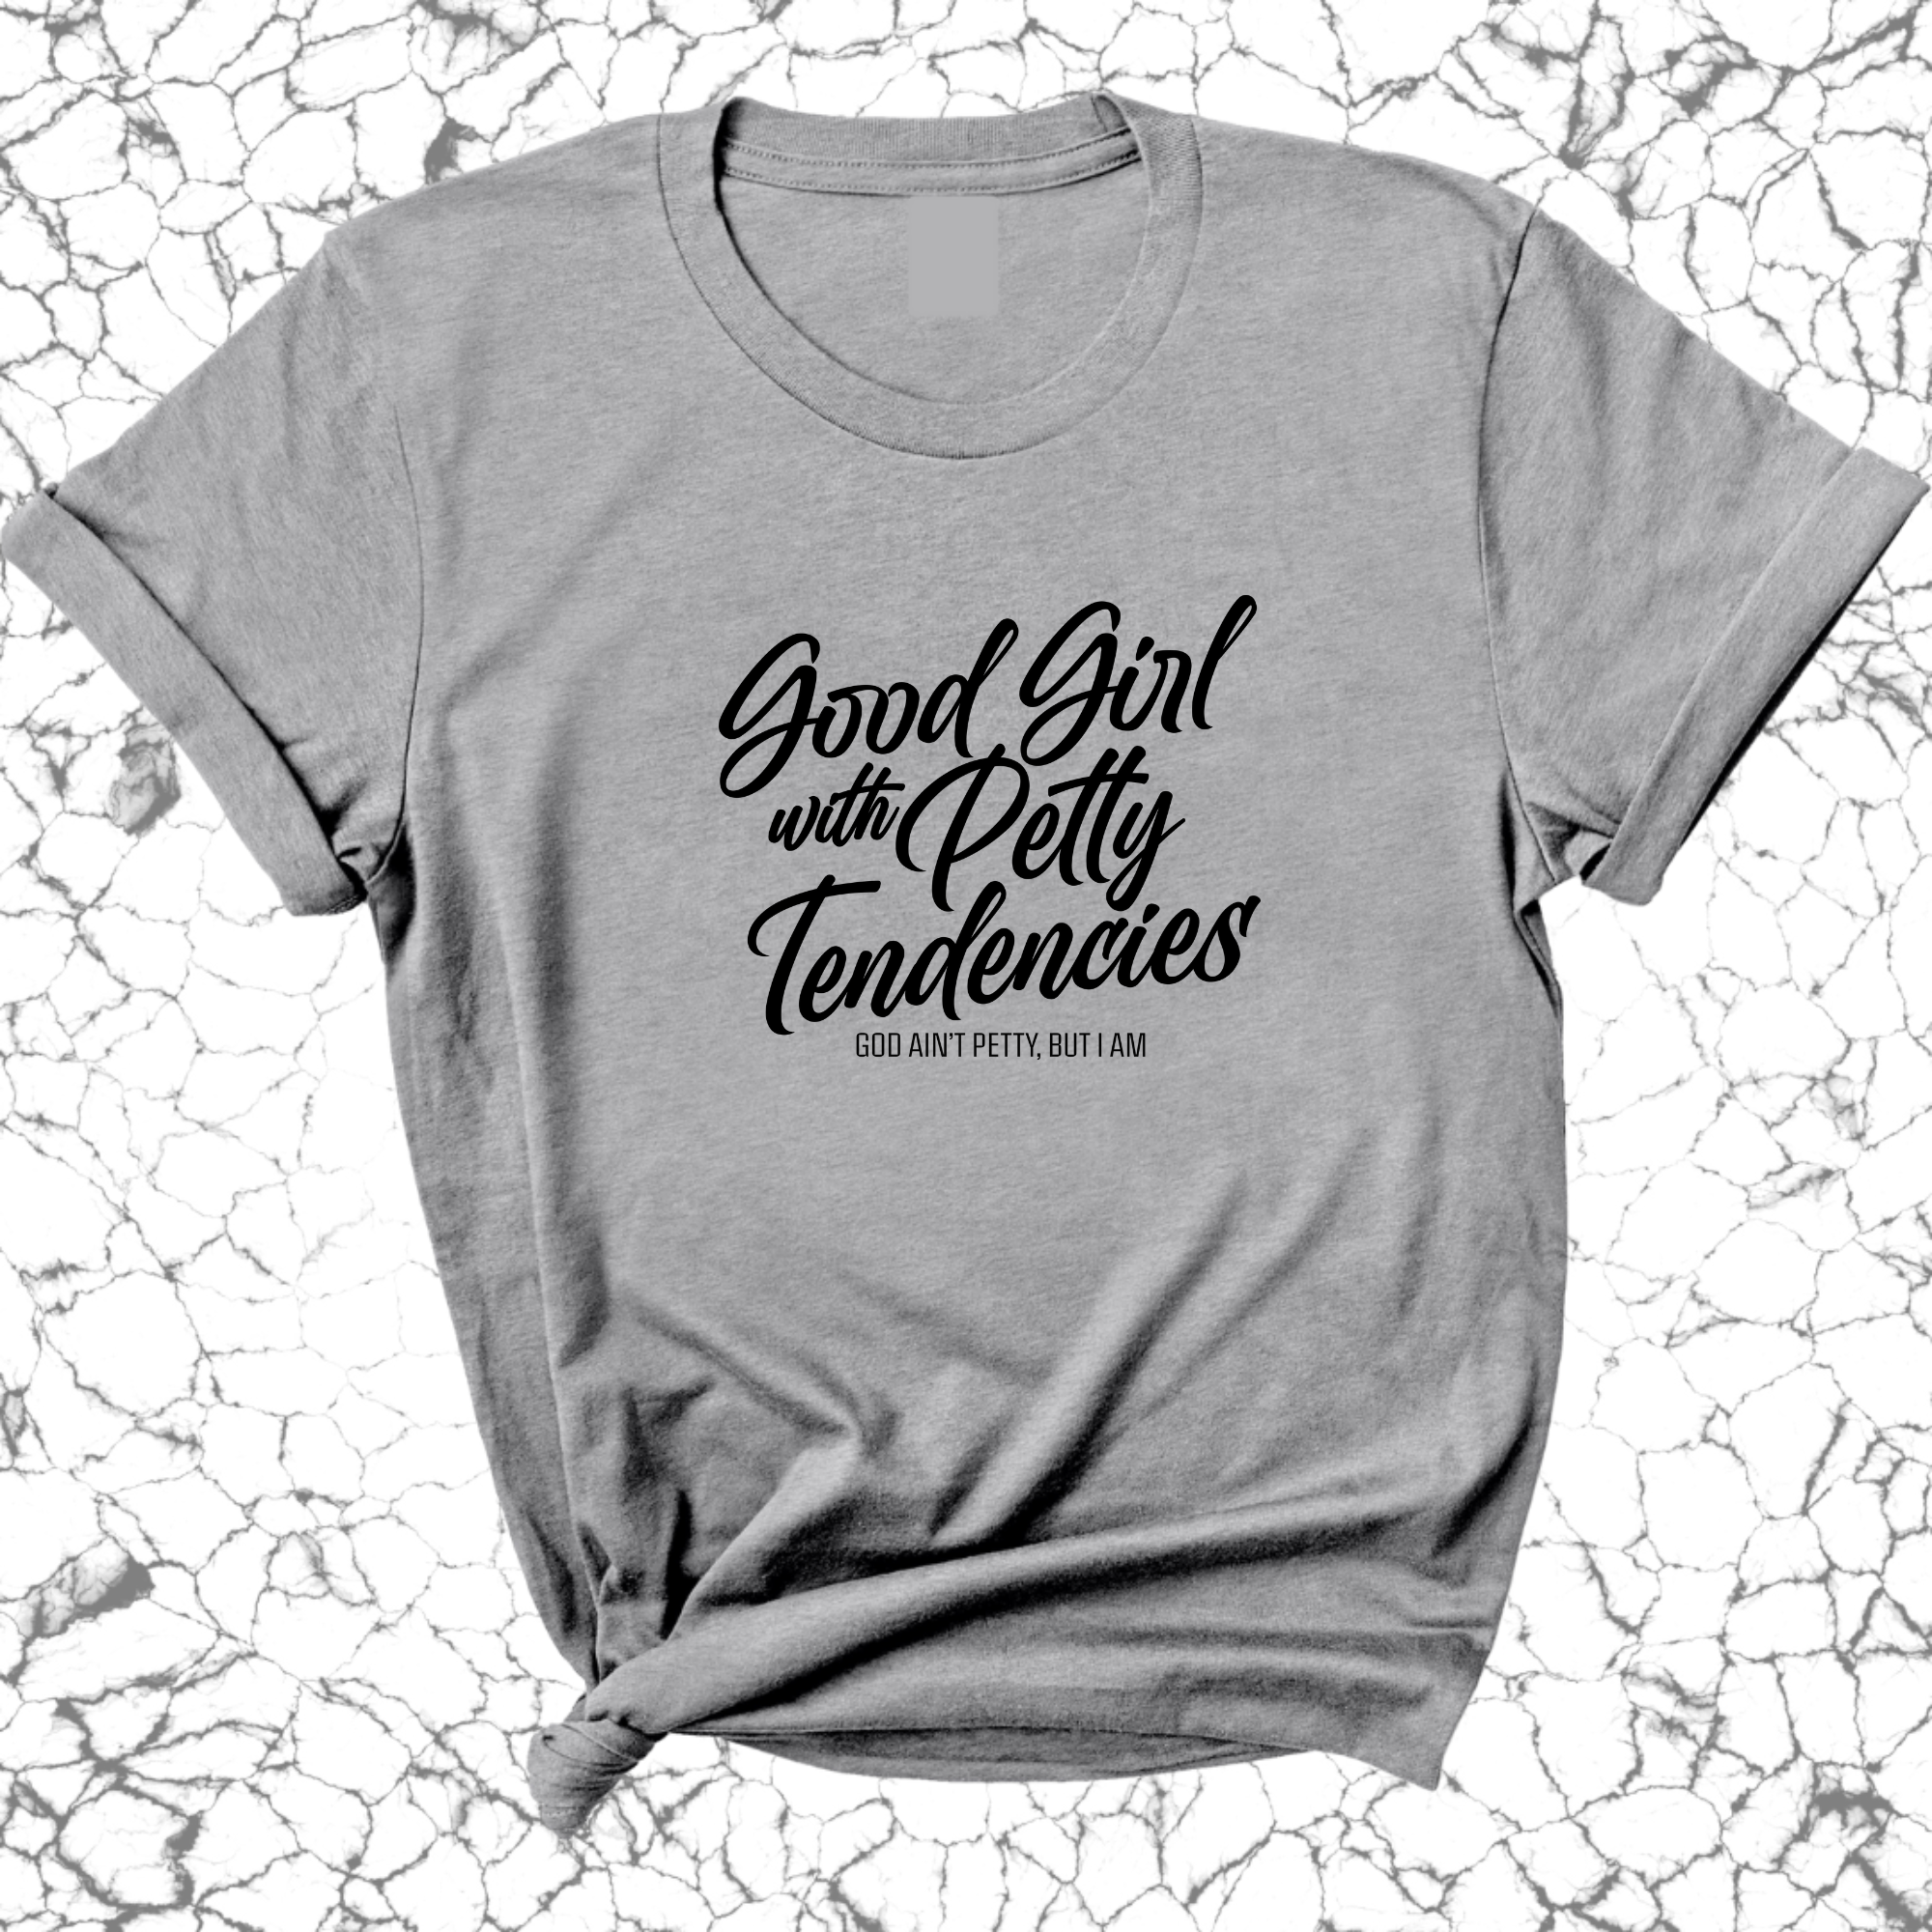 IMPERFECT - GOOD GIRL WITH PETTY TENDENCIES T-SHIRT GREY/BLACK LARGE-The Original God Ain't Petty But I Am